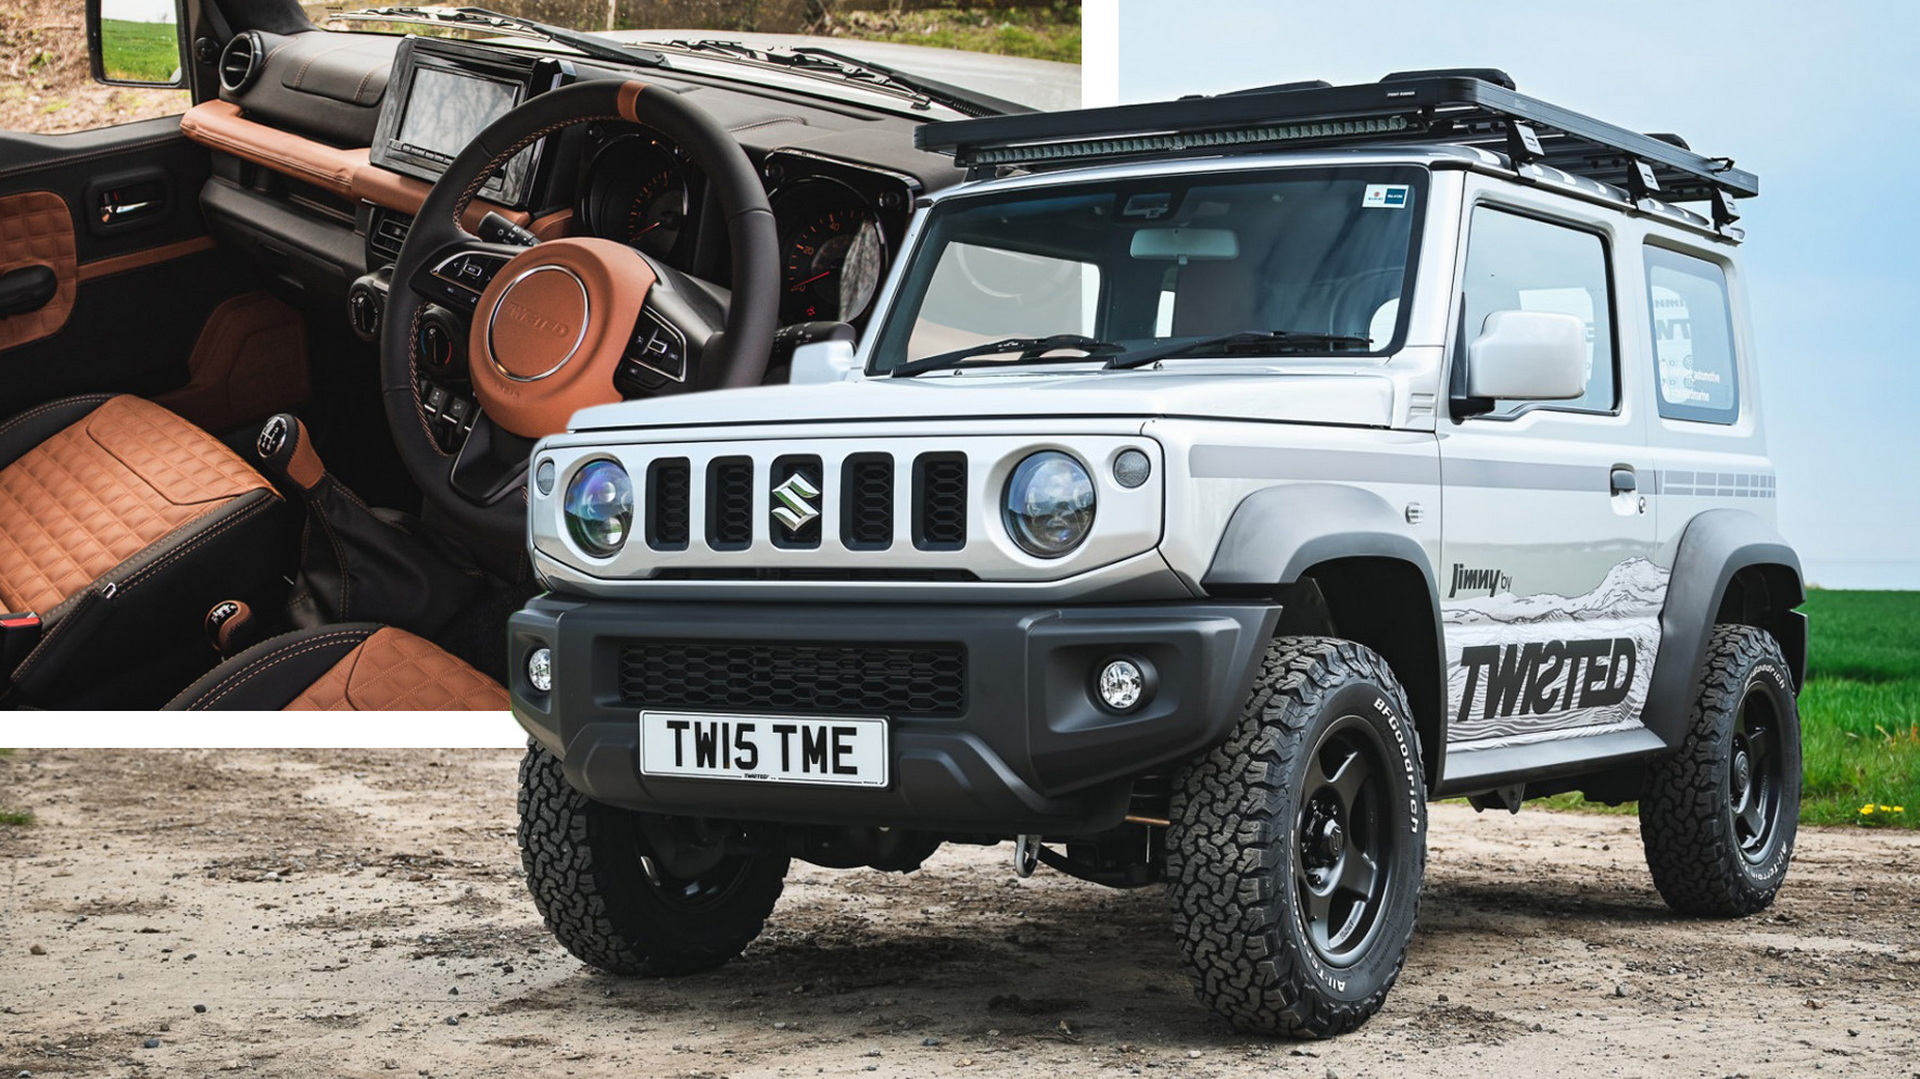 Twisted Gives Suzuki Jimny A Fancy Leather Interior And A Turbo